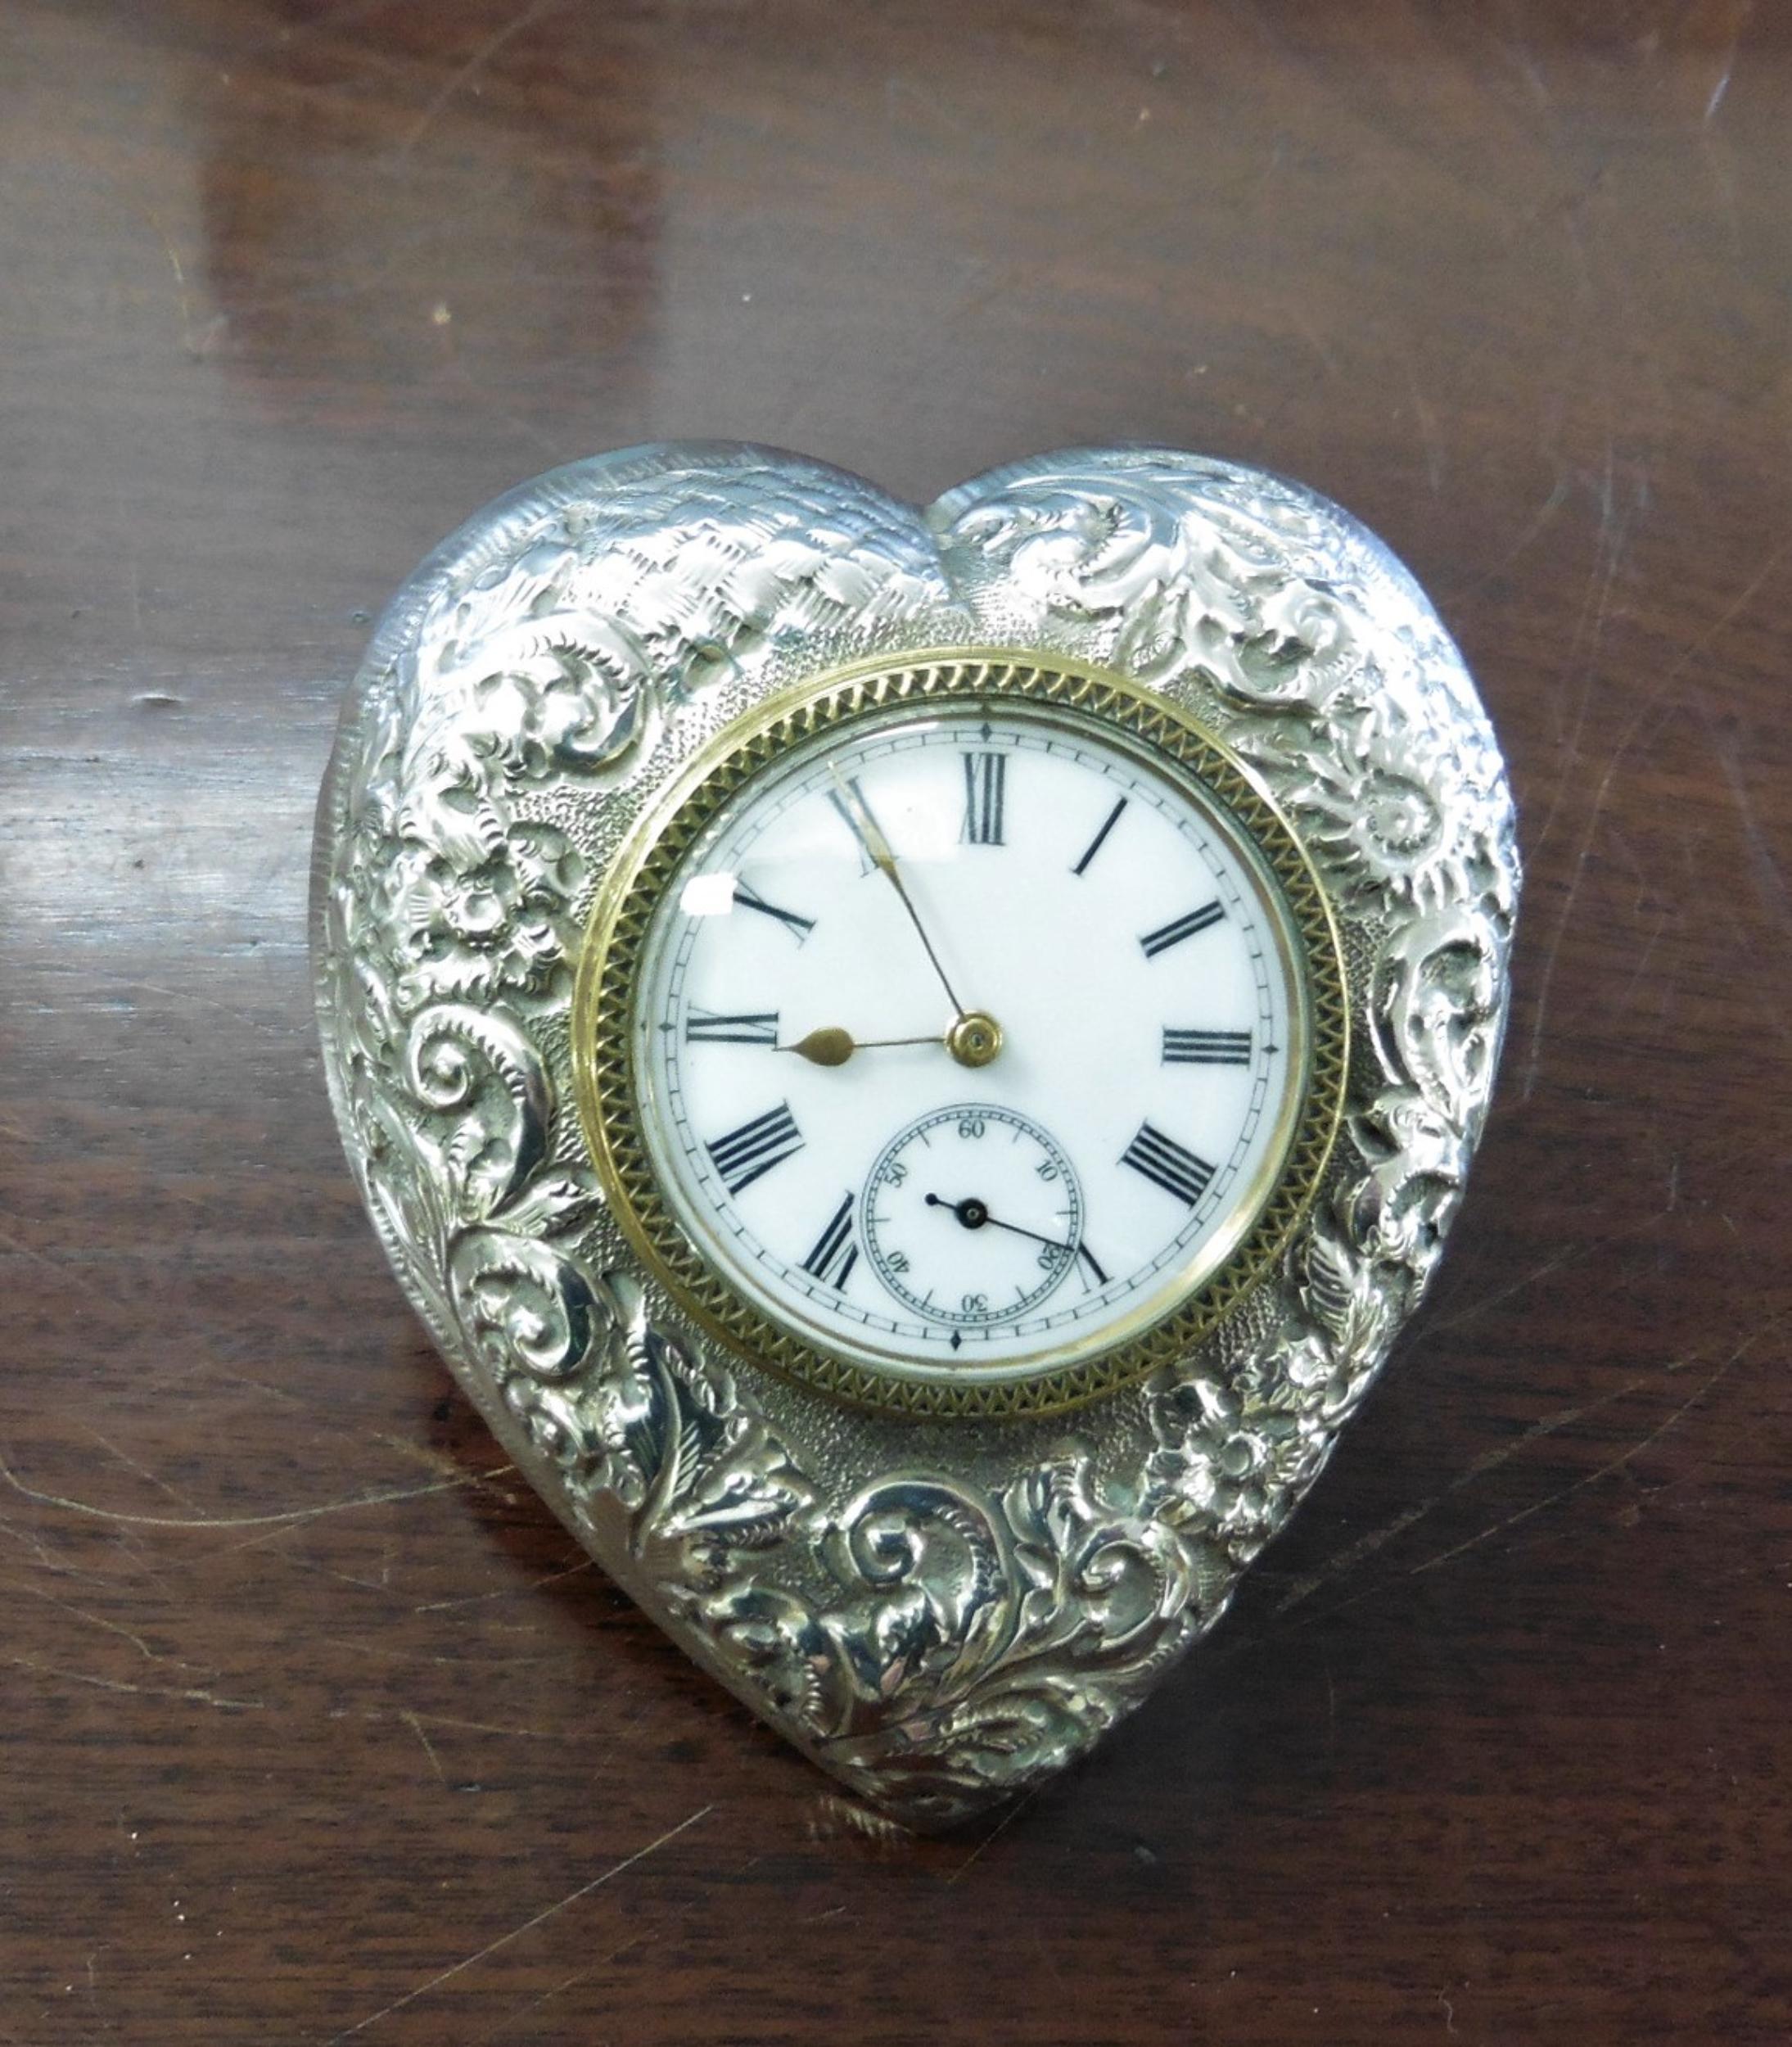 Victorian heart shaped silver strut timepiece with foliate decoration. Brass bezel with hatched decoration, enamel dial with Roman numerals, original gilded hands and a subsidiary dial for seconds at six o’clock. The case hallmarked for Birmingham